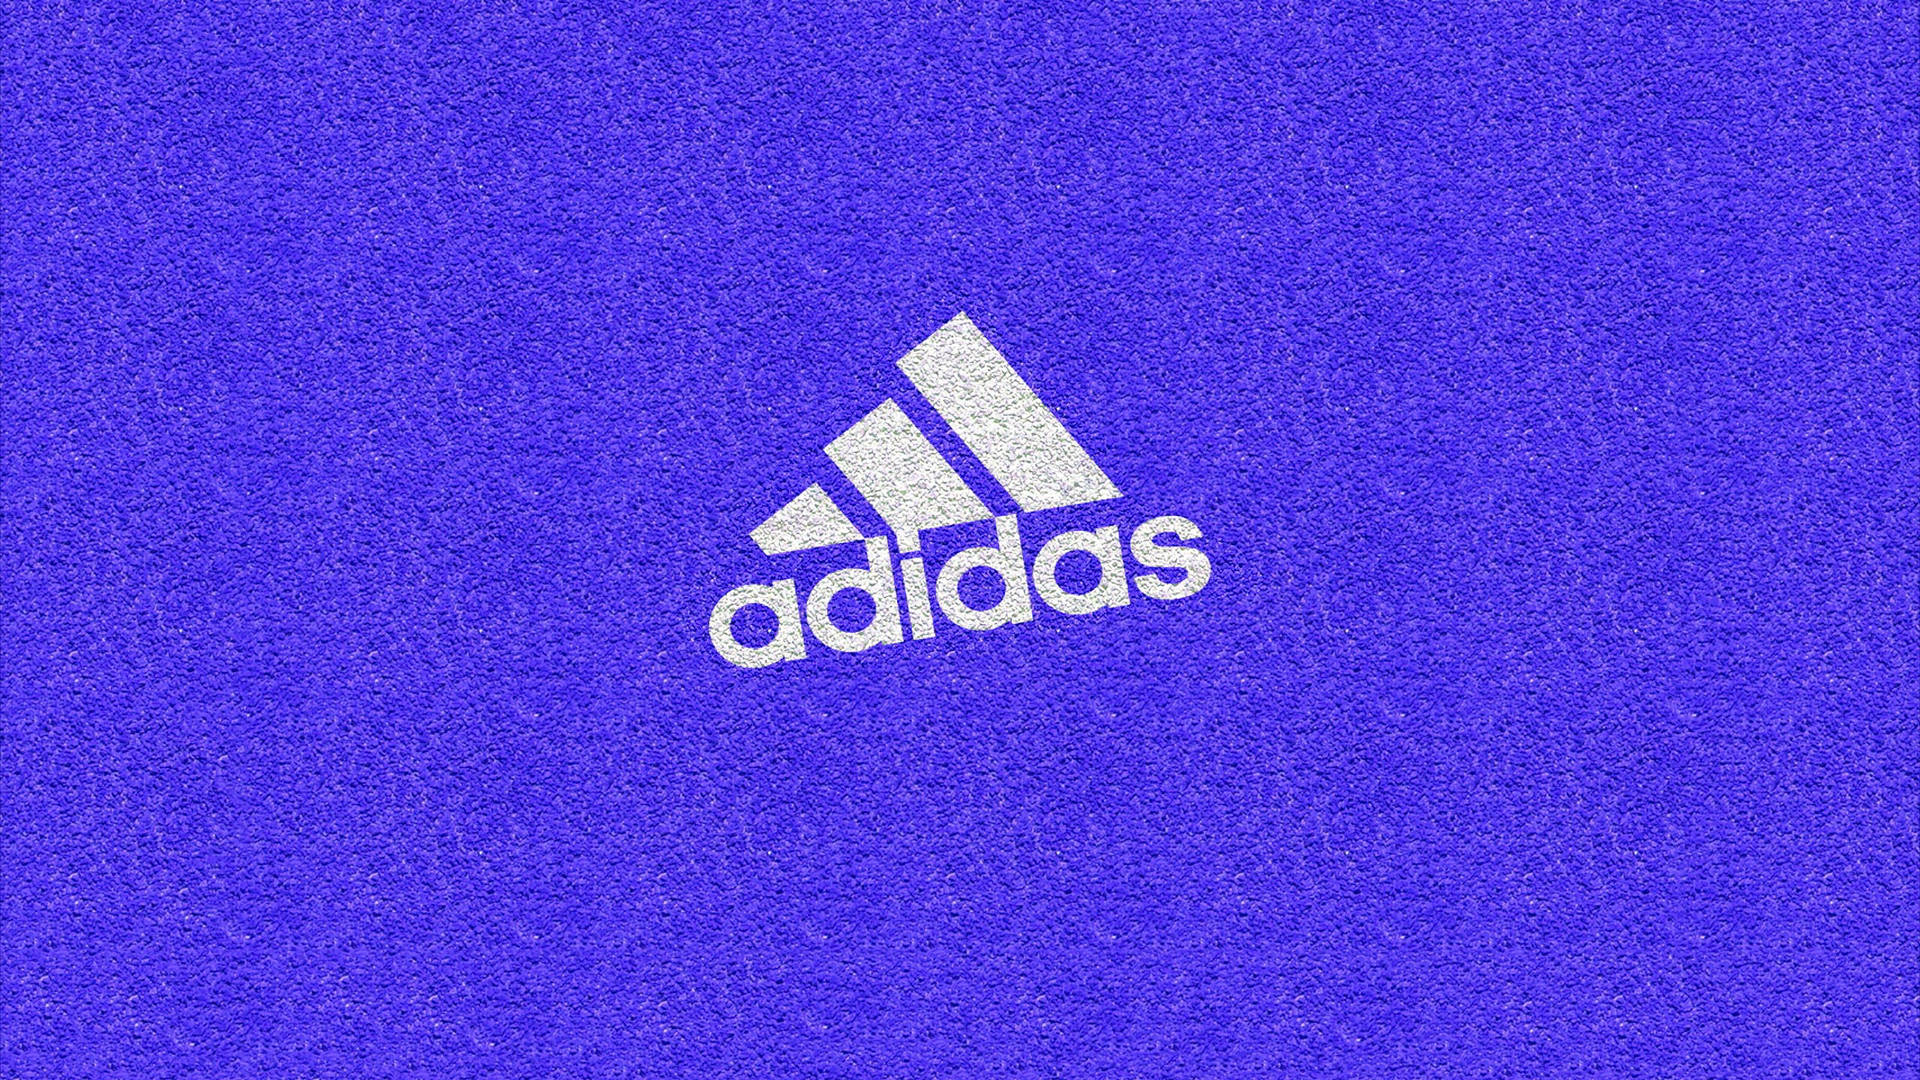 The iconic Adidas logo in purple Wallpaper